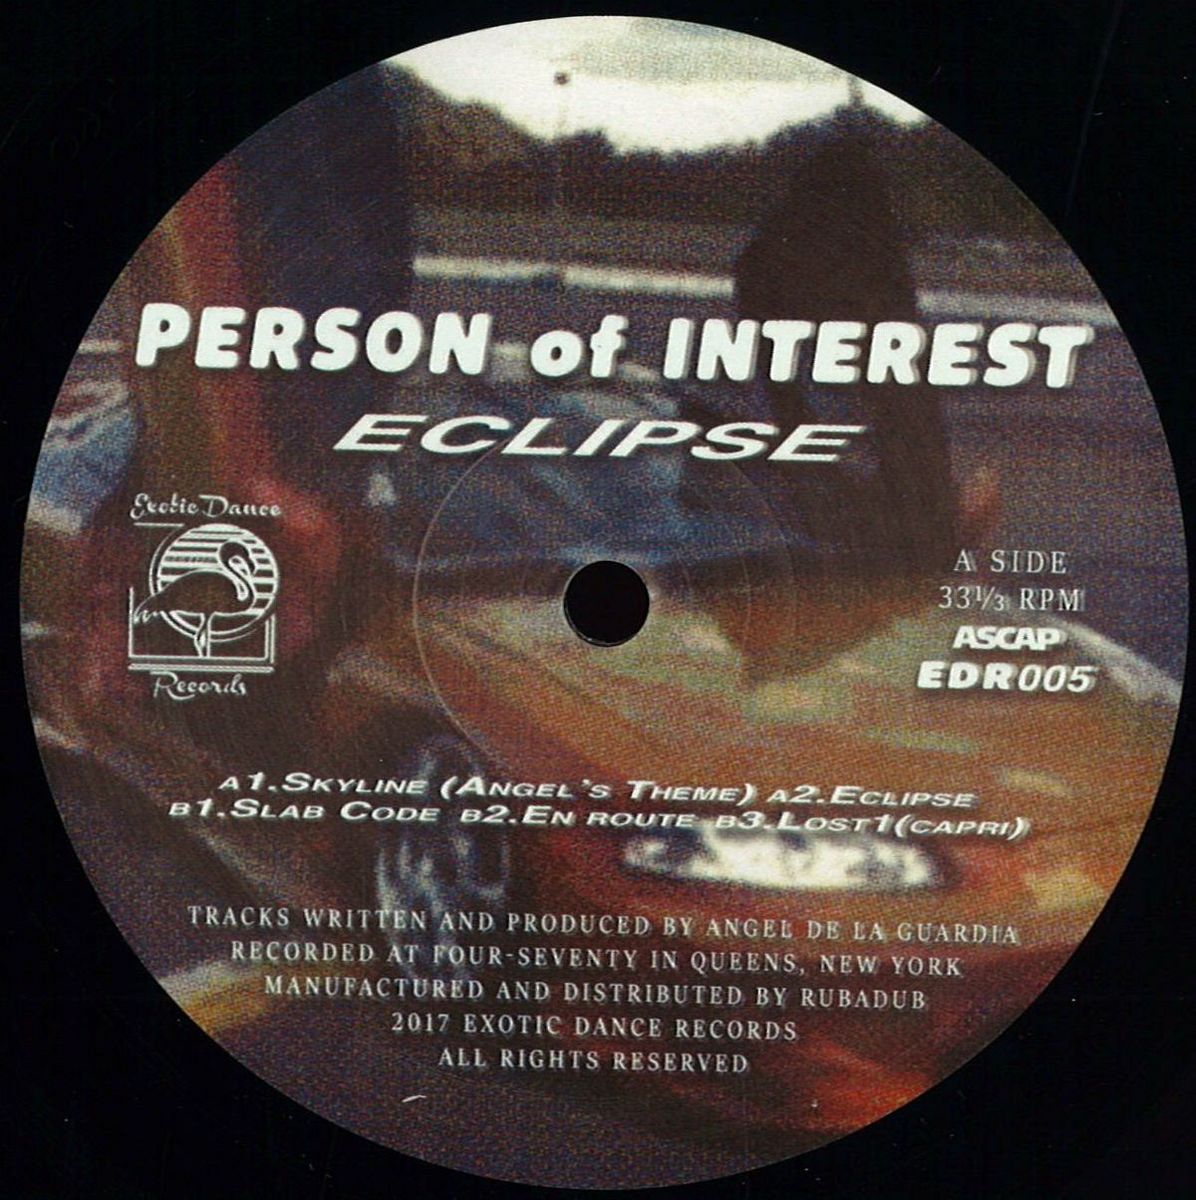 image cover: VINYL: Person of Interest - Eclipse / Exotic Dance Records